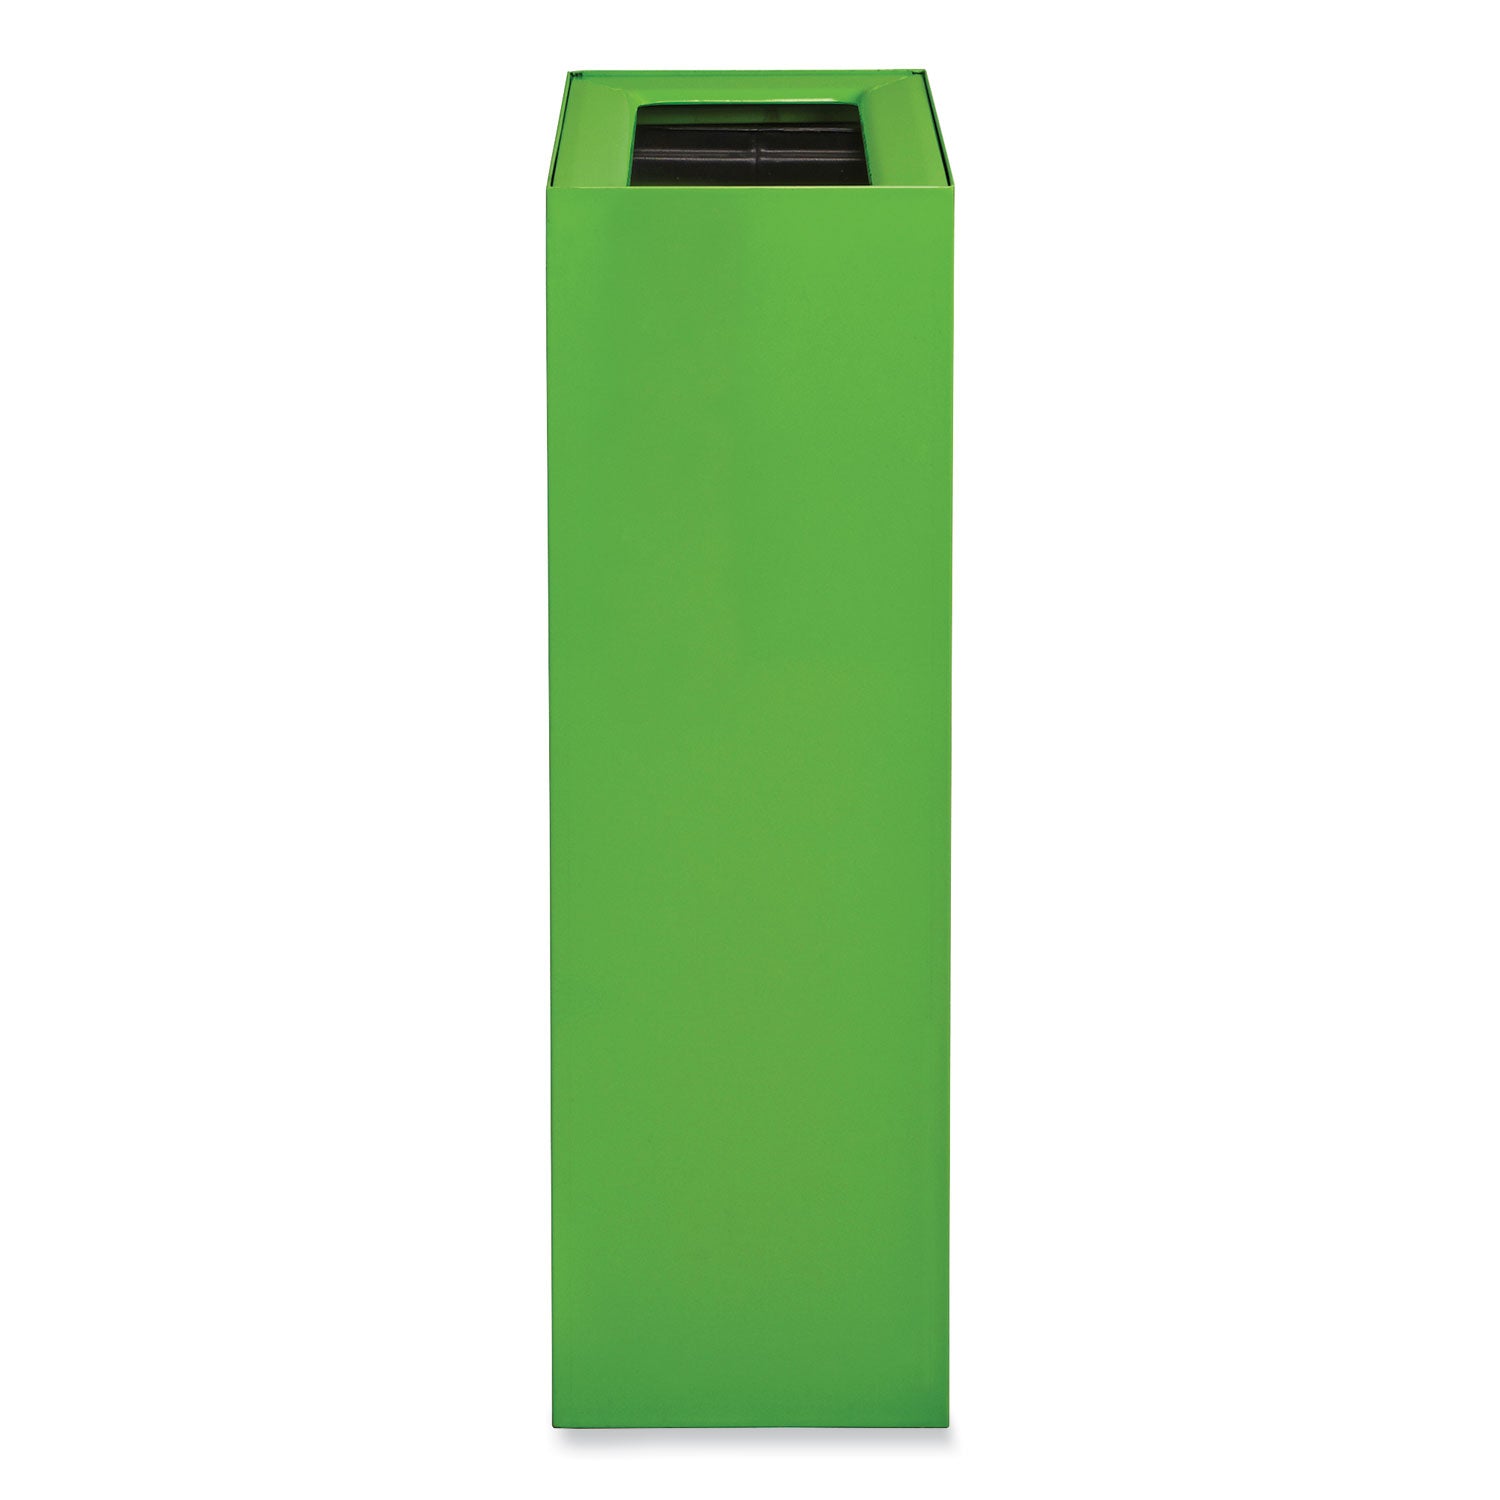 mixx-recycling-center-rectangular-receptacle-29-gal-steel-green-ships-in-1-3-business-days_saf9448gn - 4